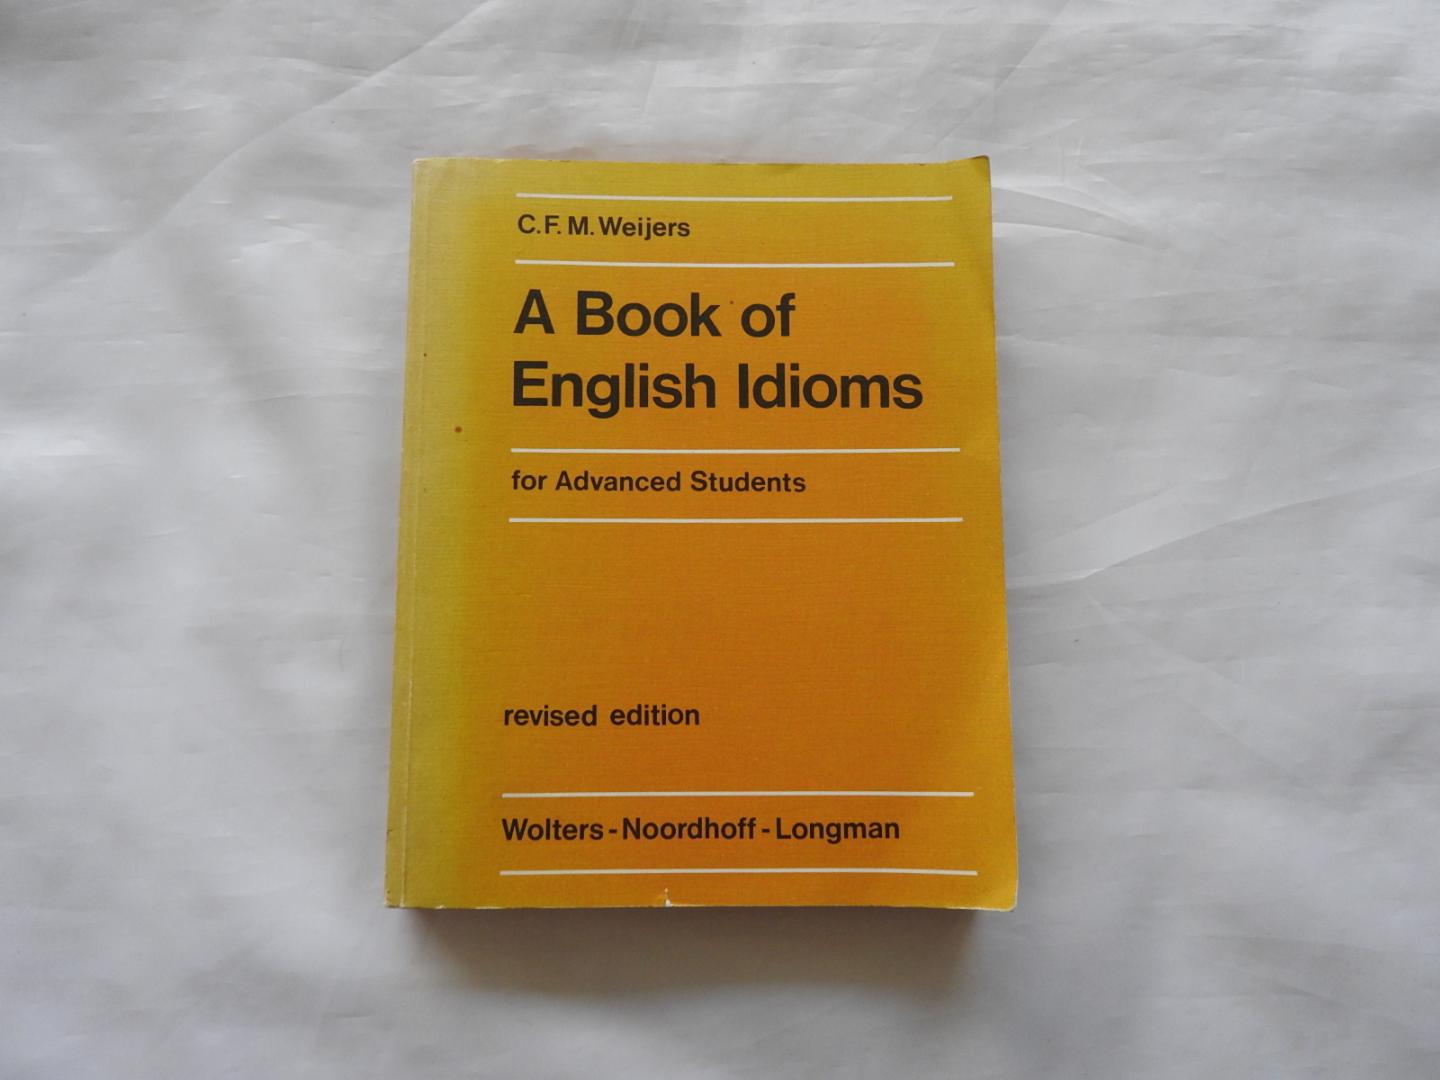 Weijers C.F.M. - A Book of English Idioms